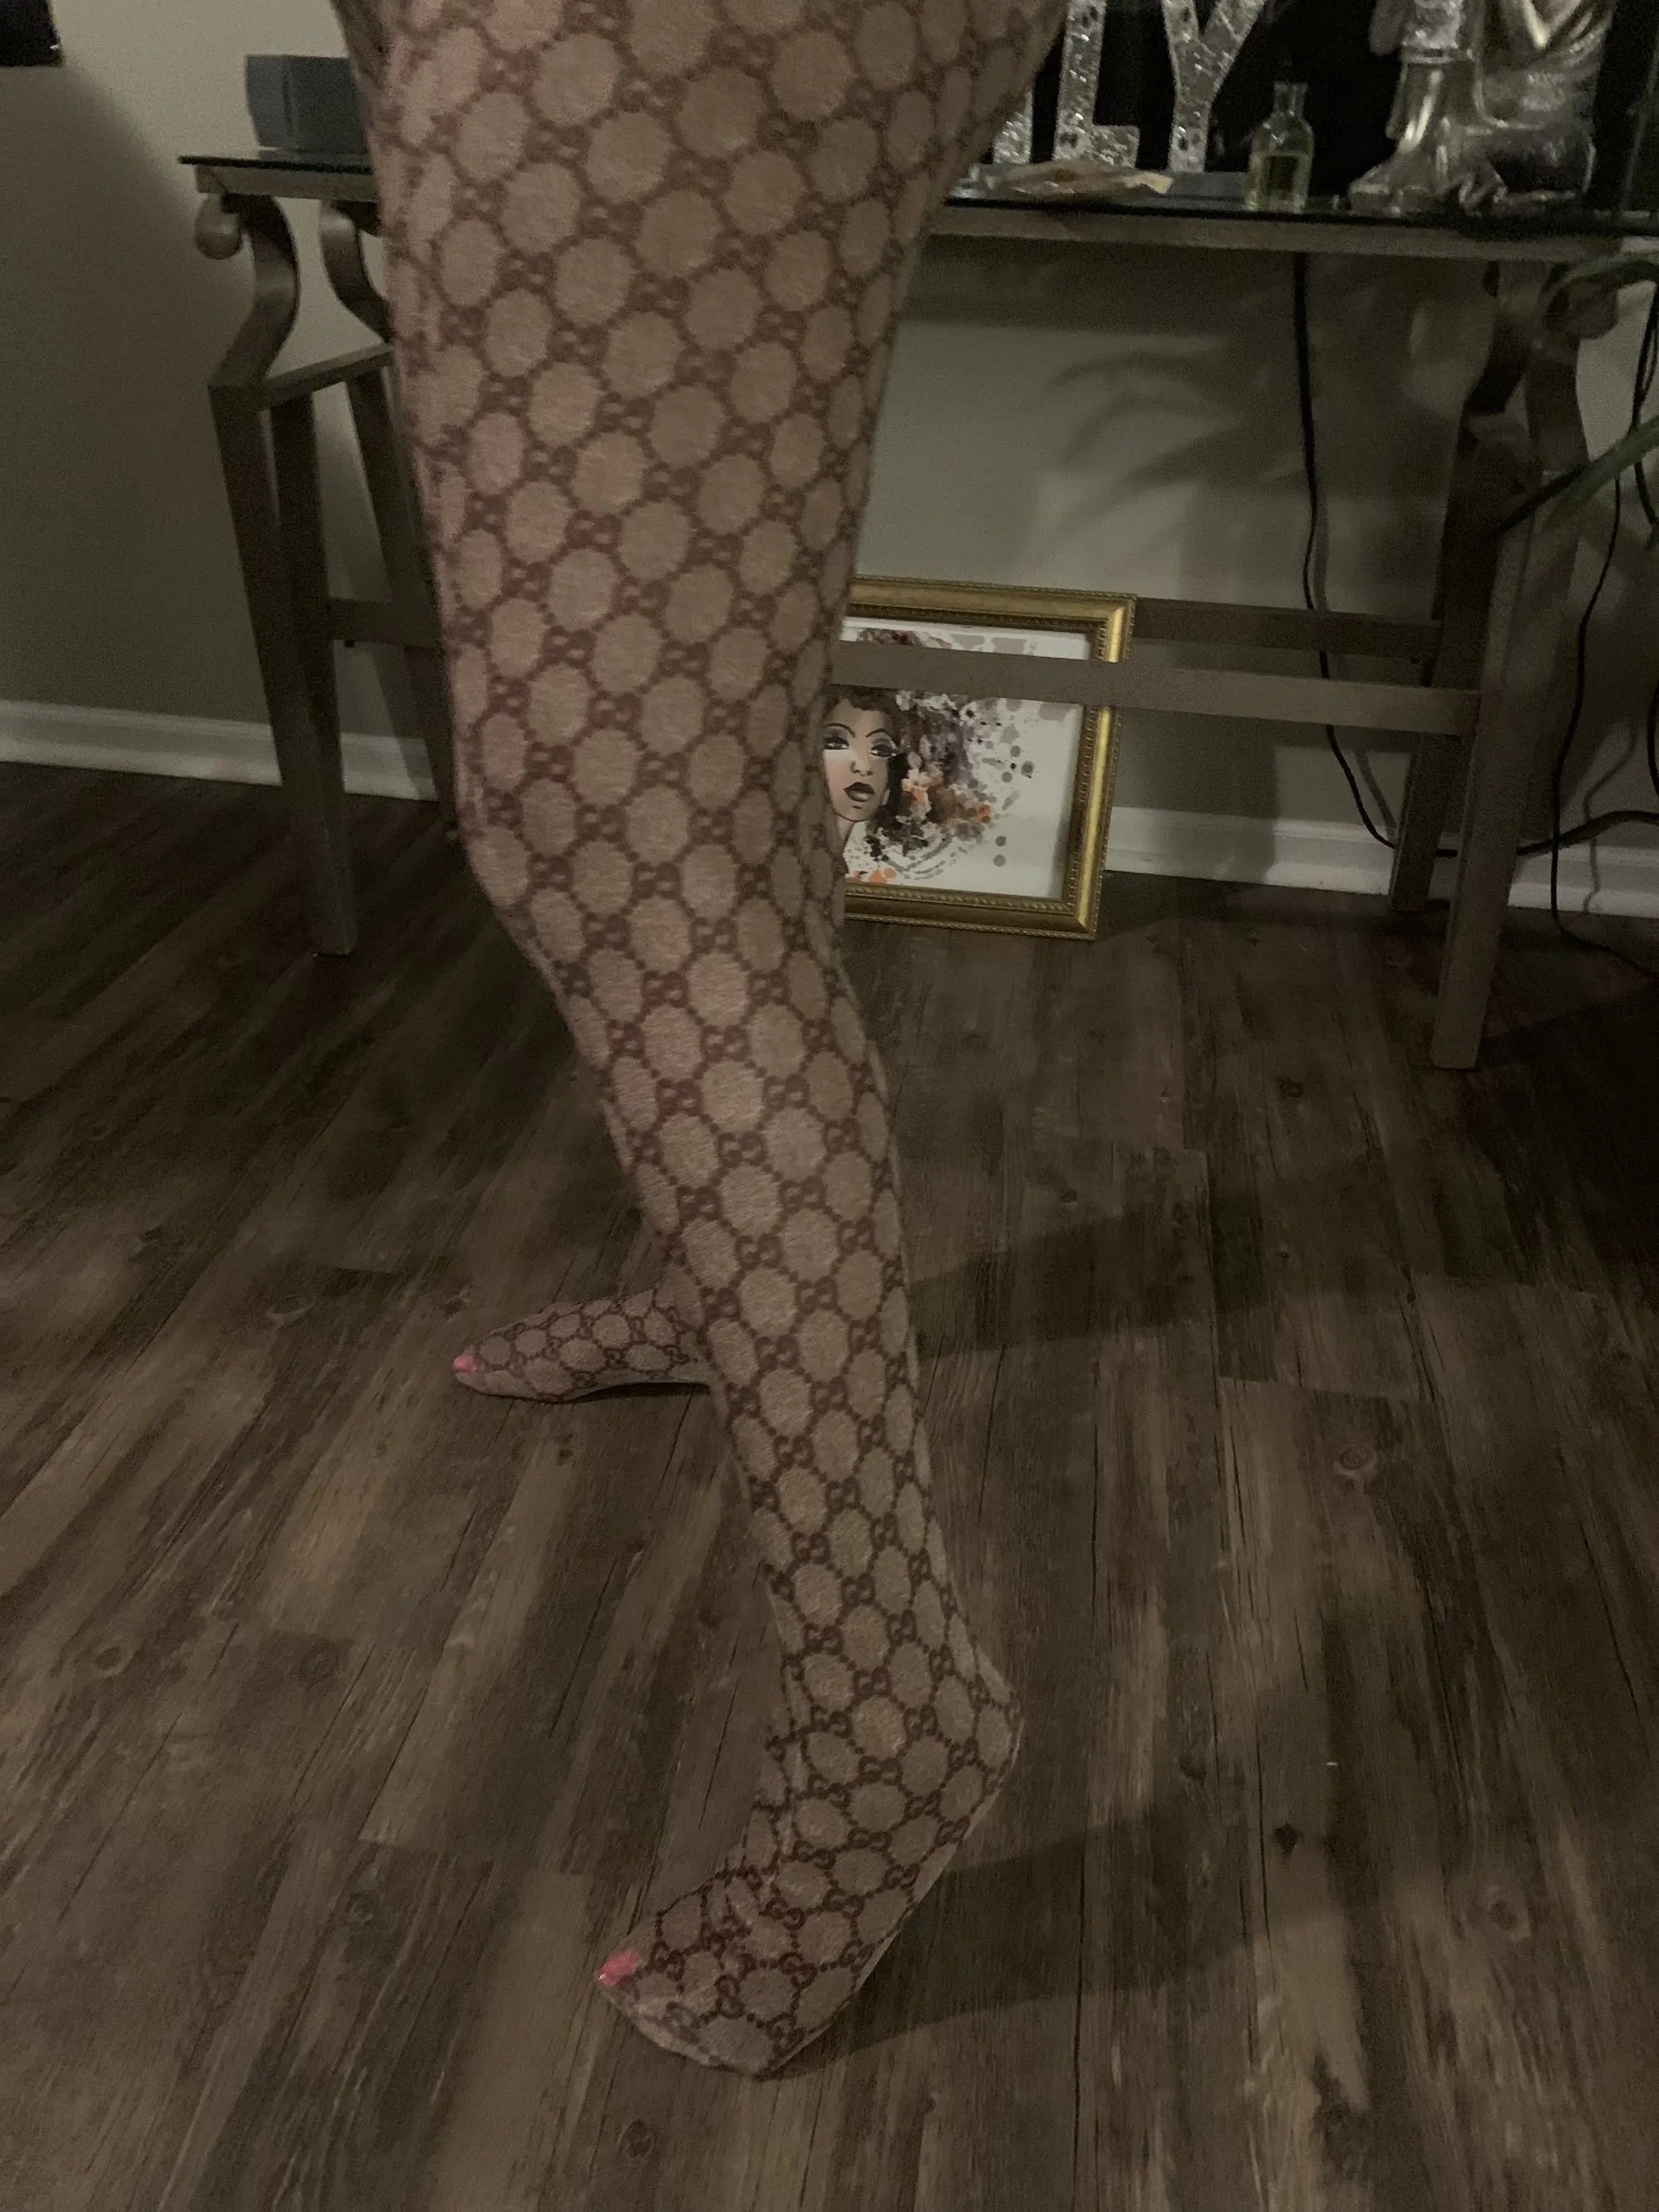 Gucci GG Patterned Tights in Brown